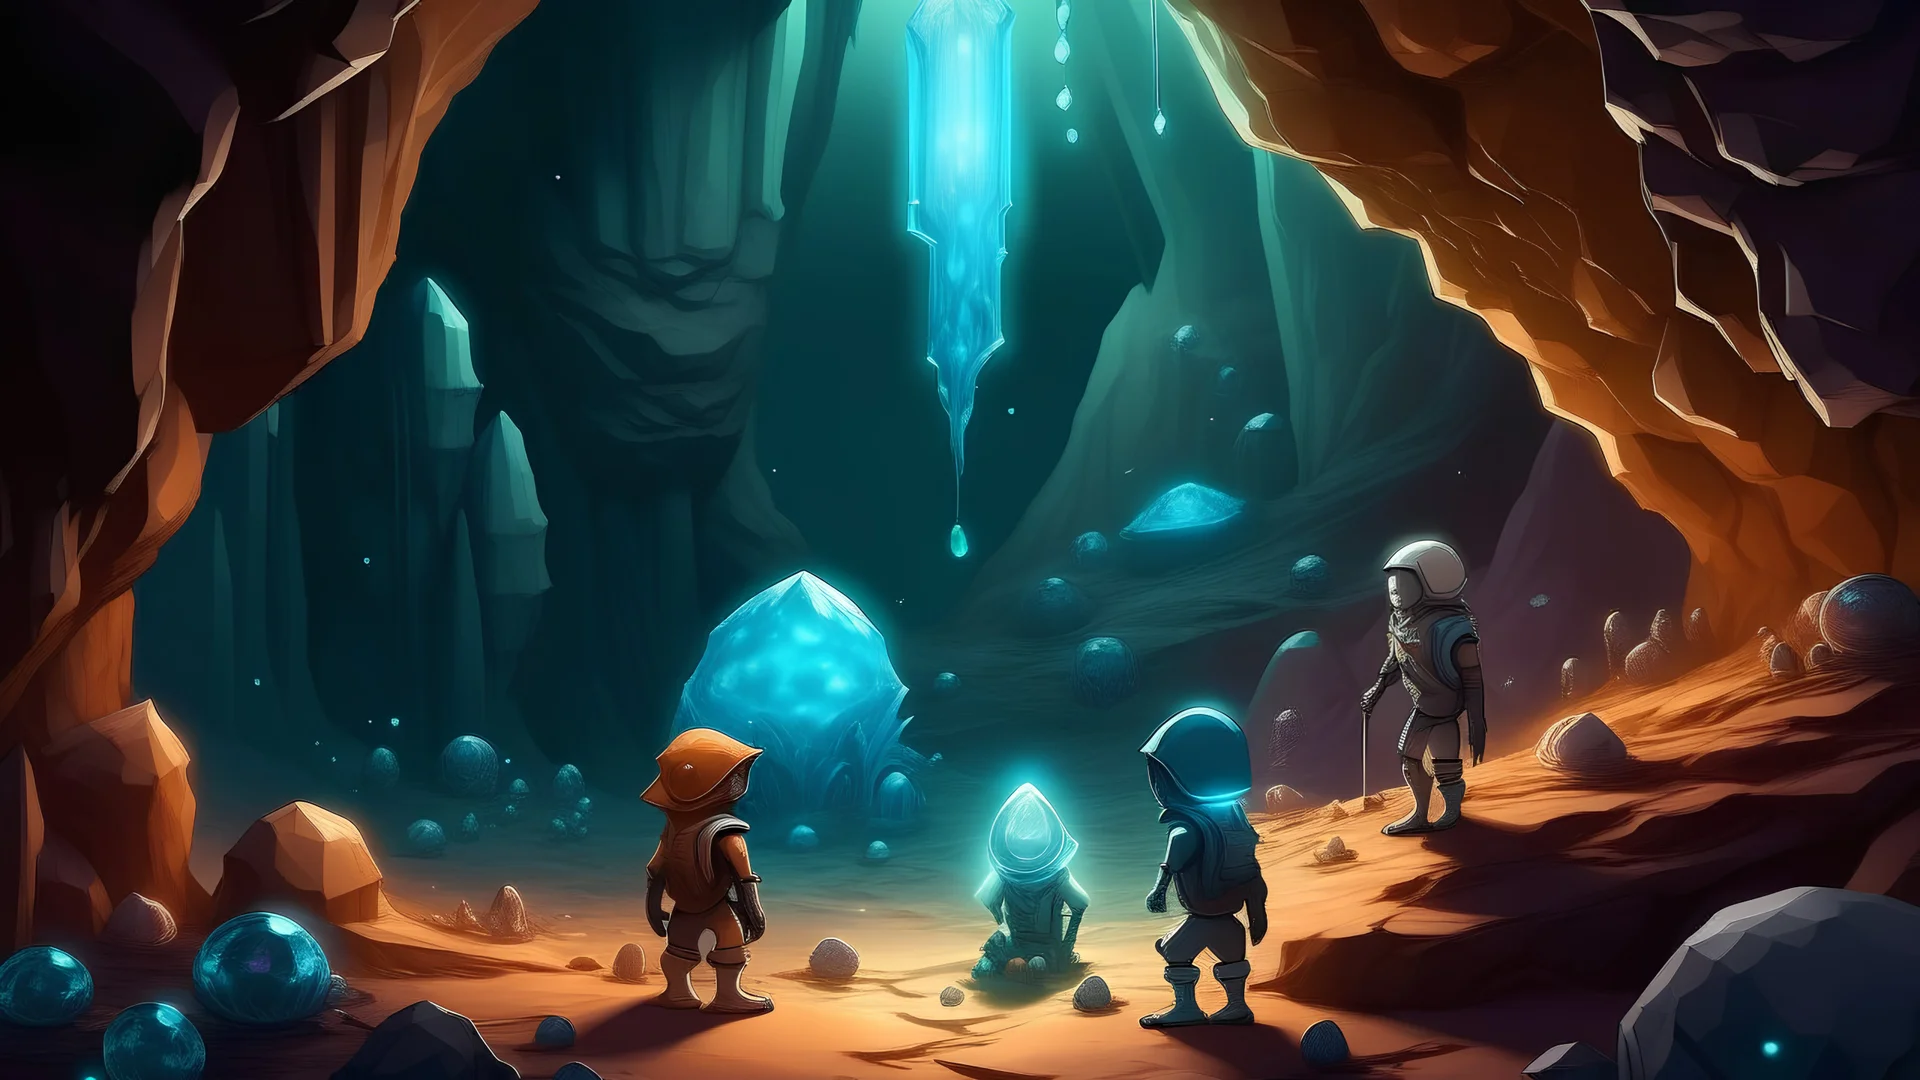 A precious crystal exists in a cave on a planet similar to Mars. Different races of aliens and humans are all looking for this.